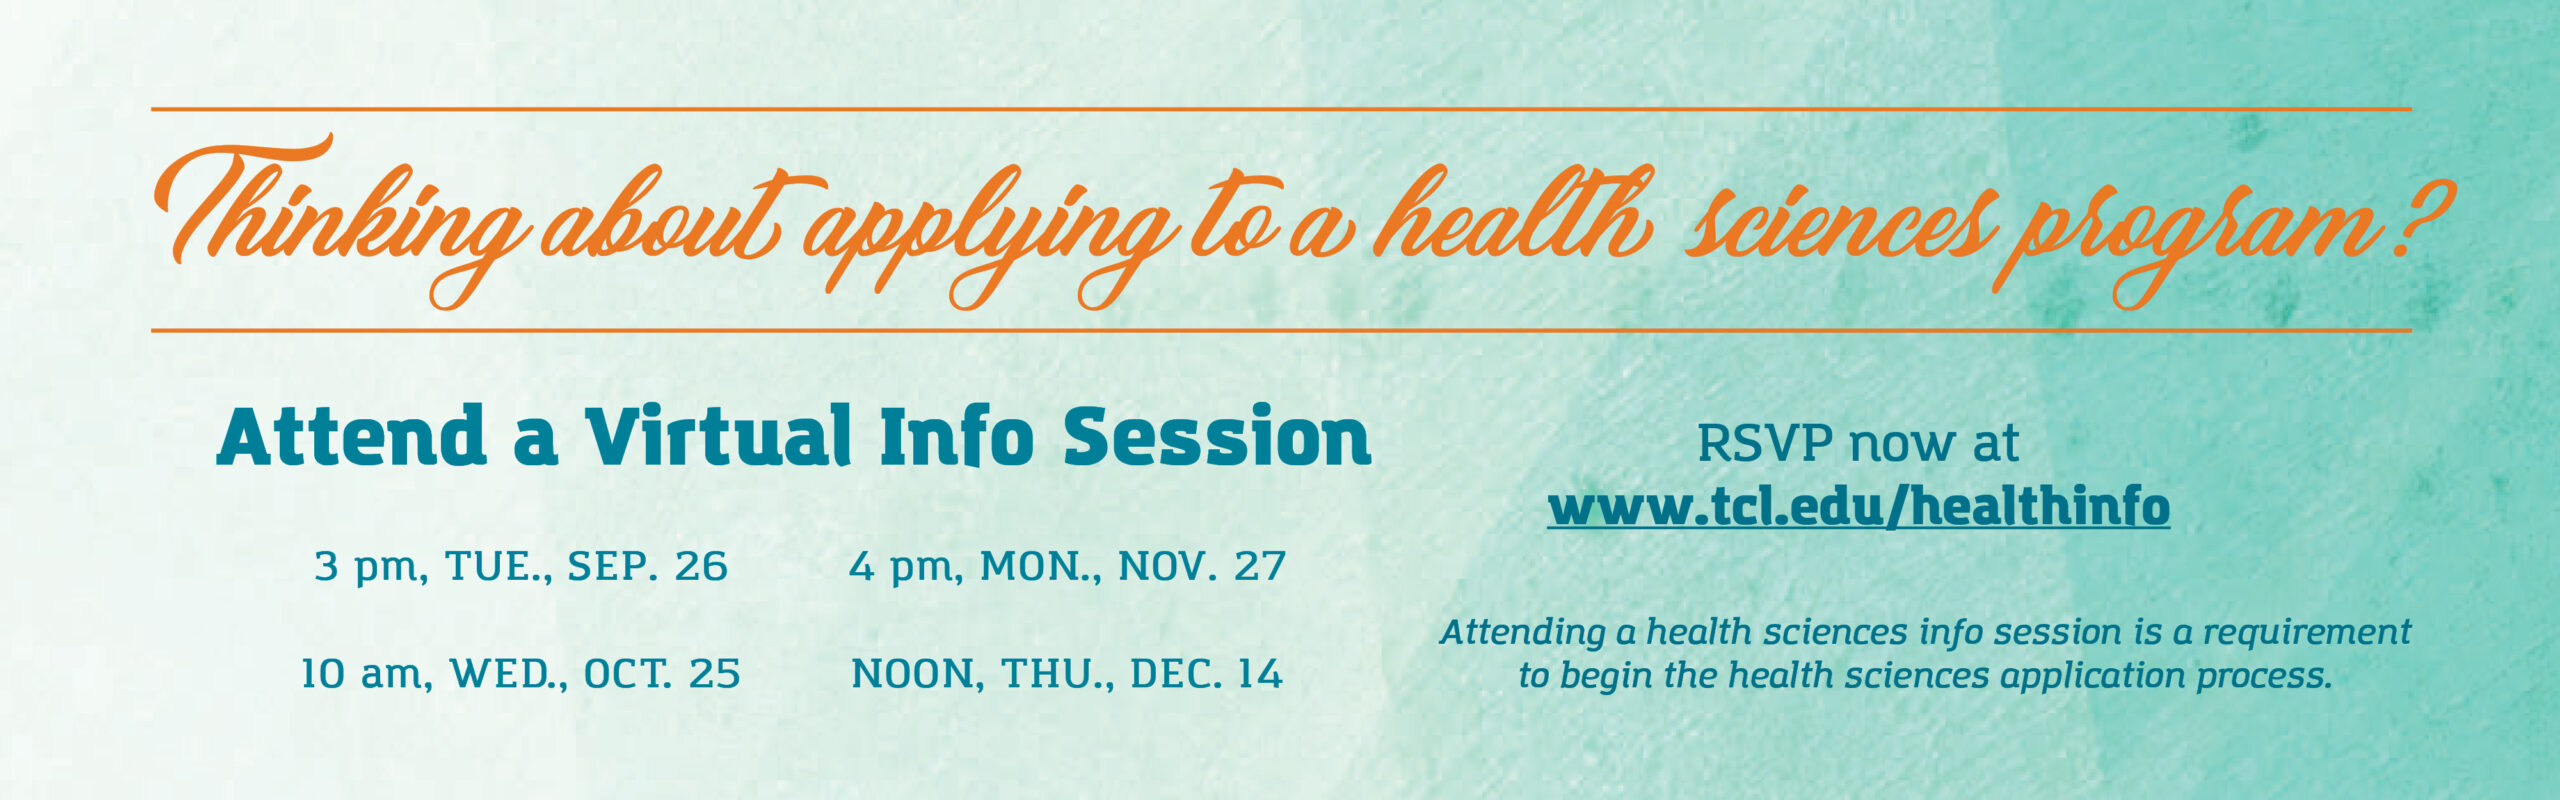 Health Sciences Info Sessions